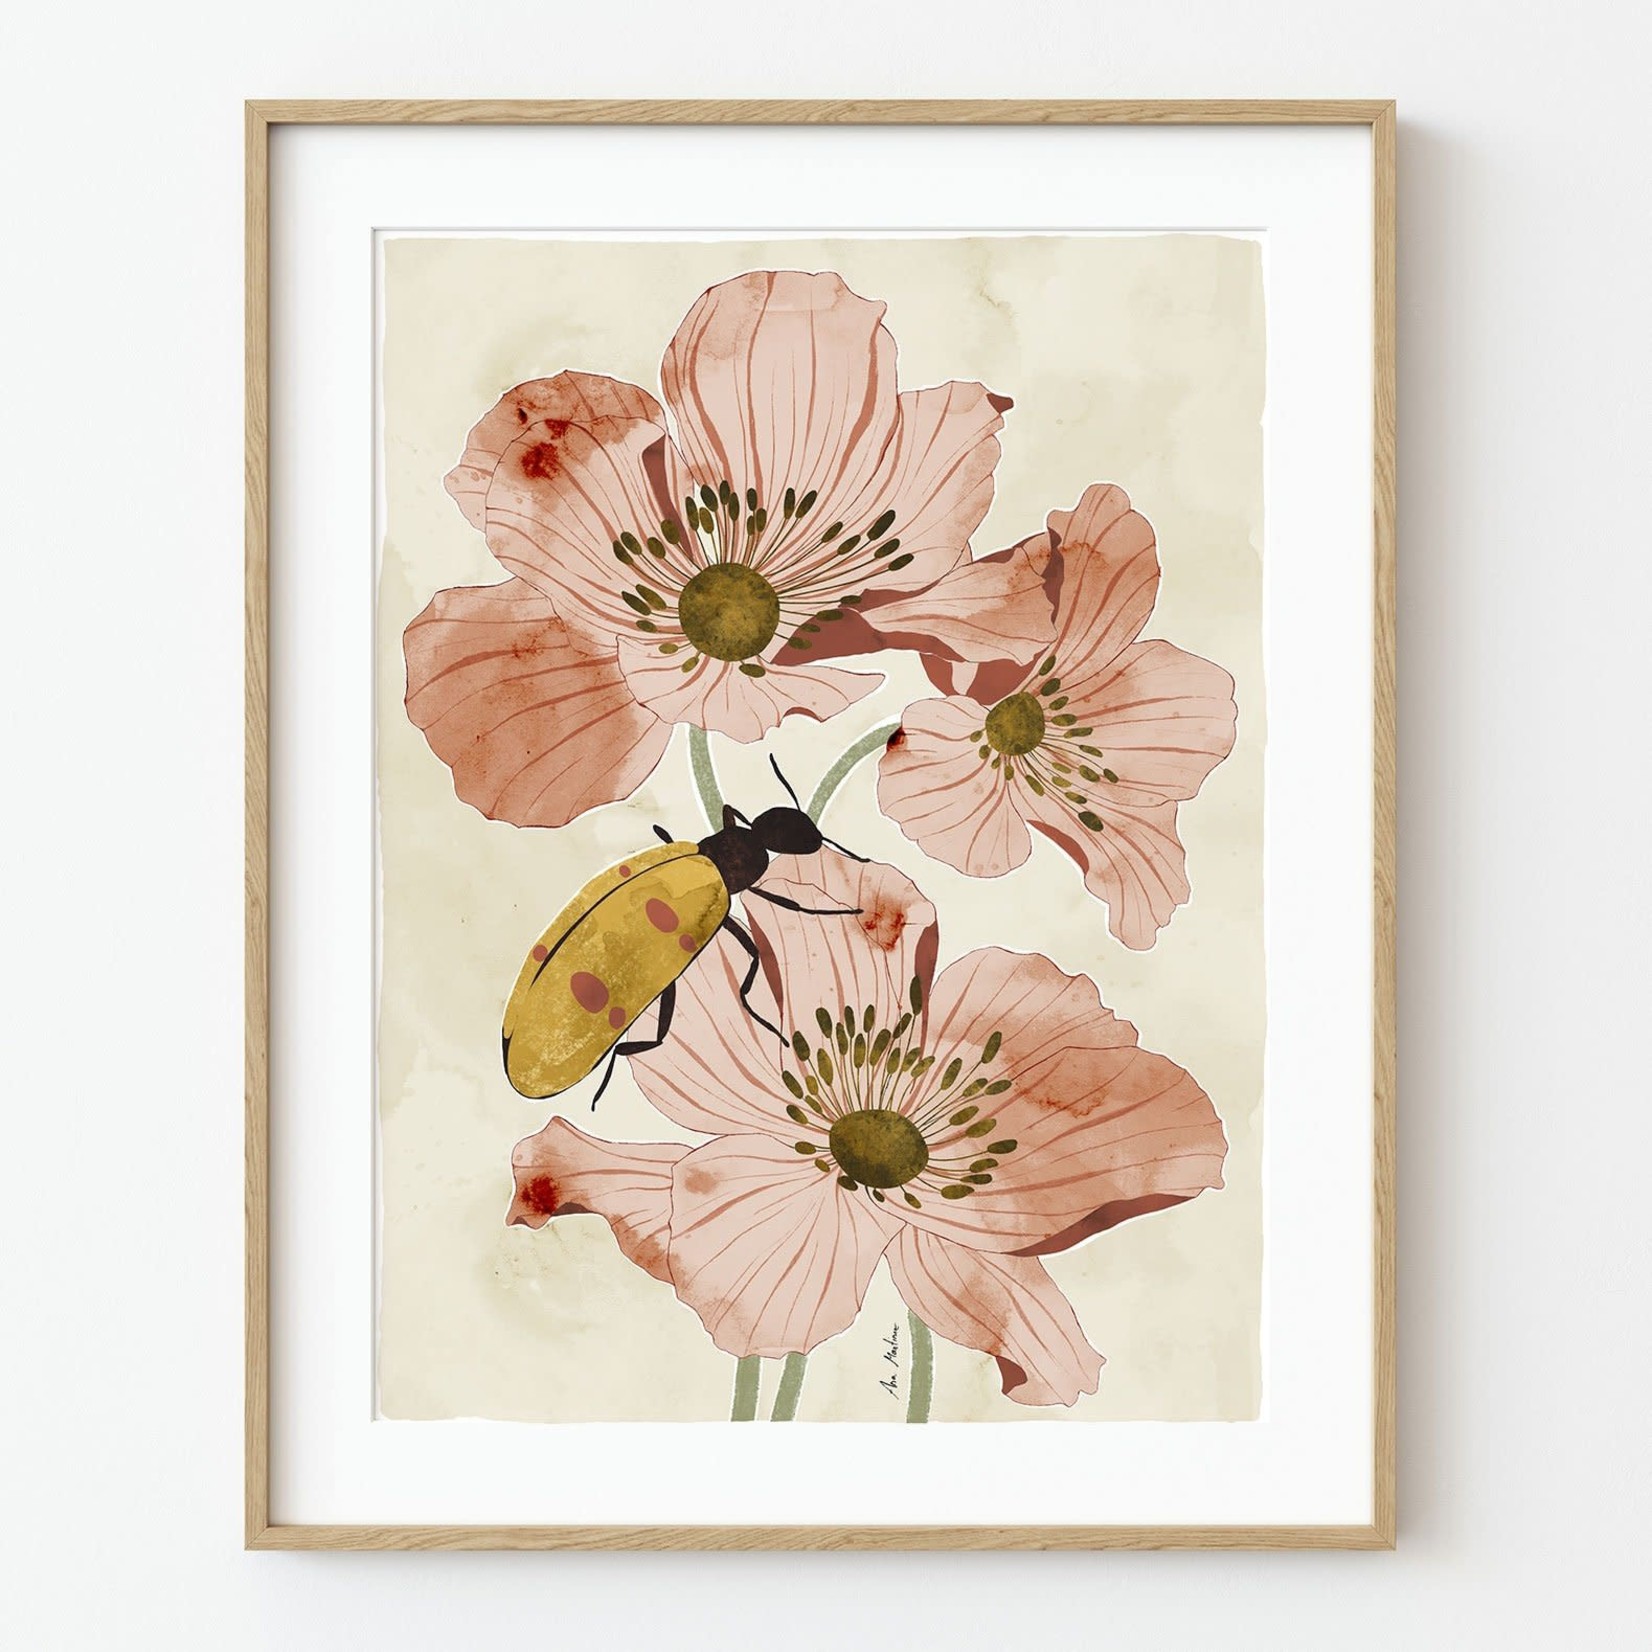 El Buen Limón Flowers and Insects Art Print